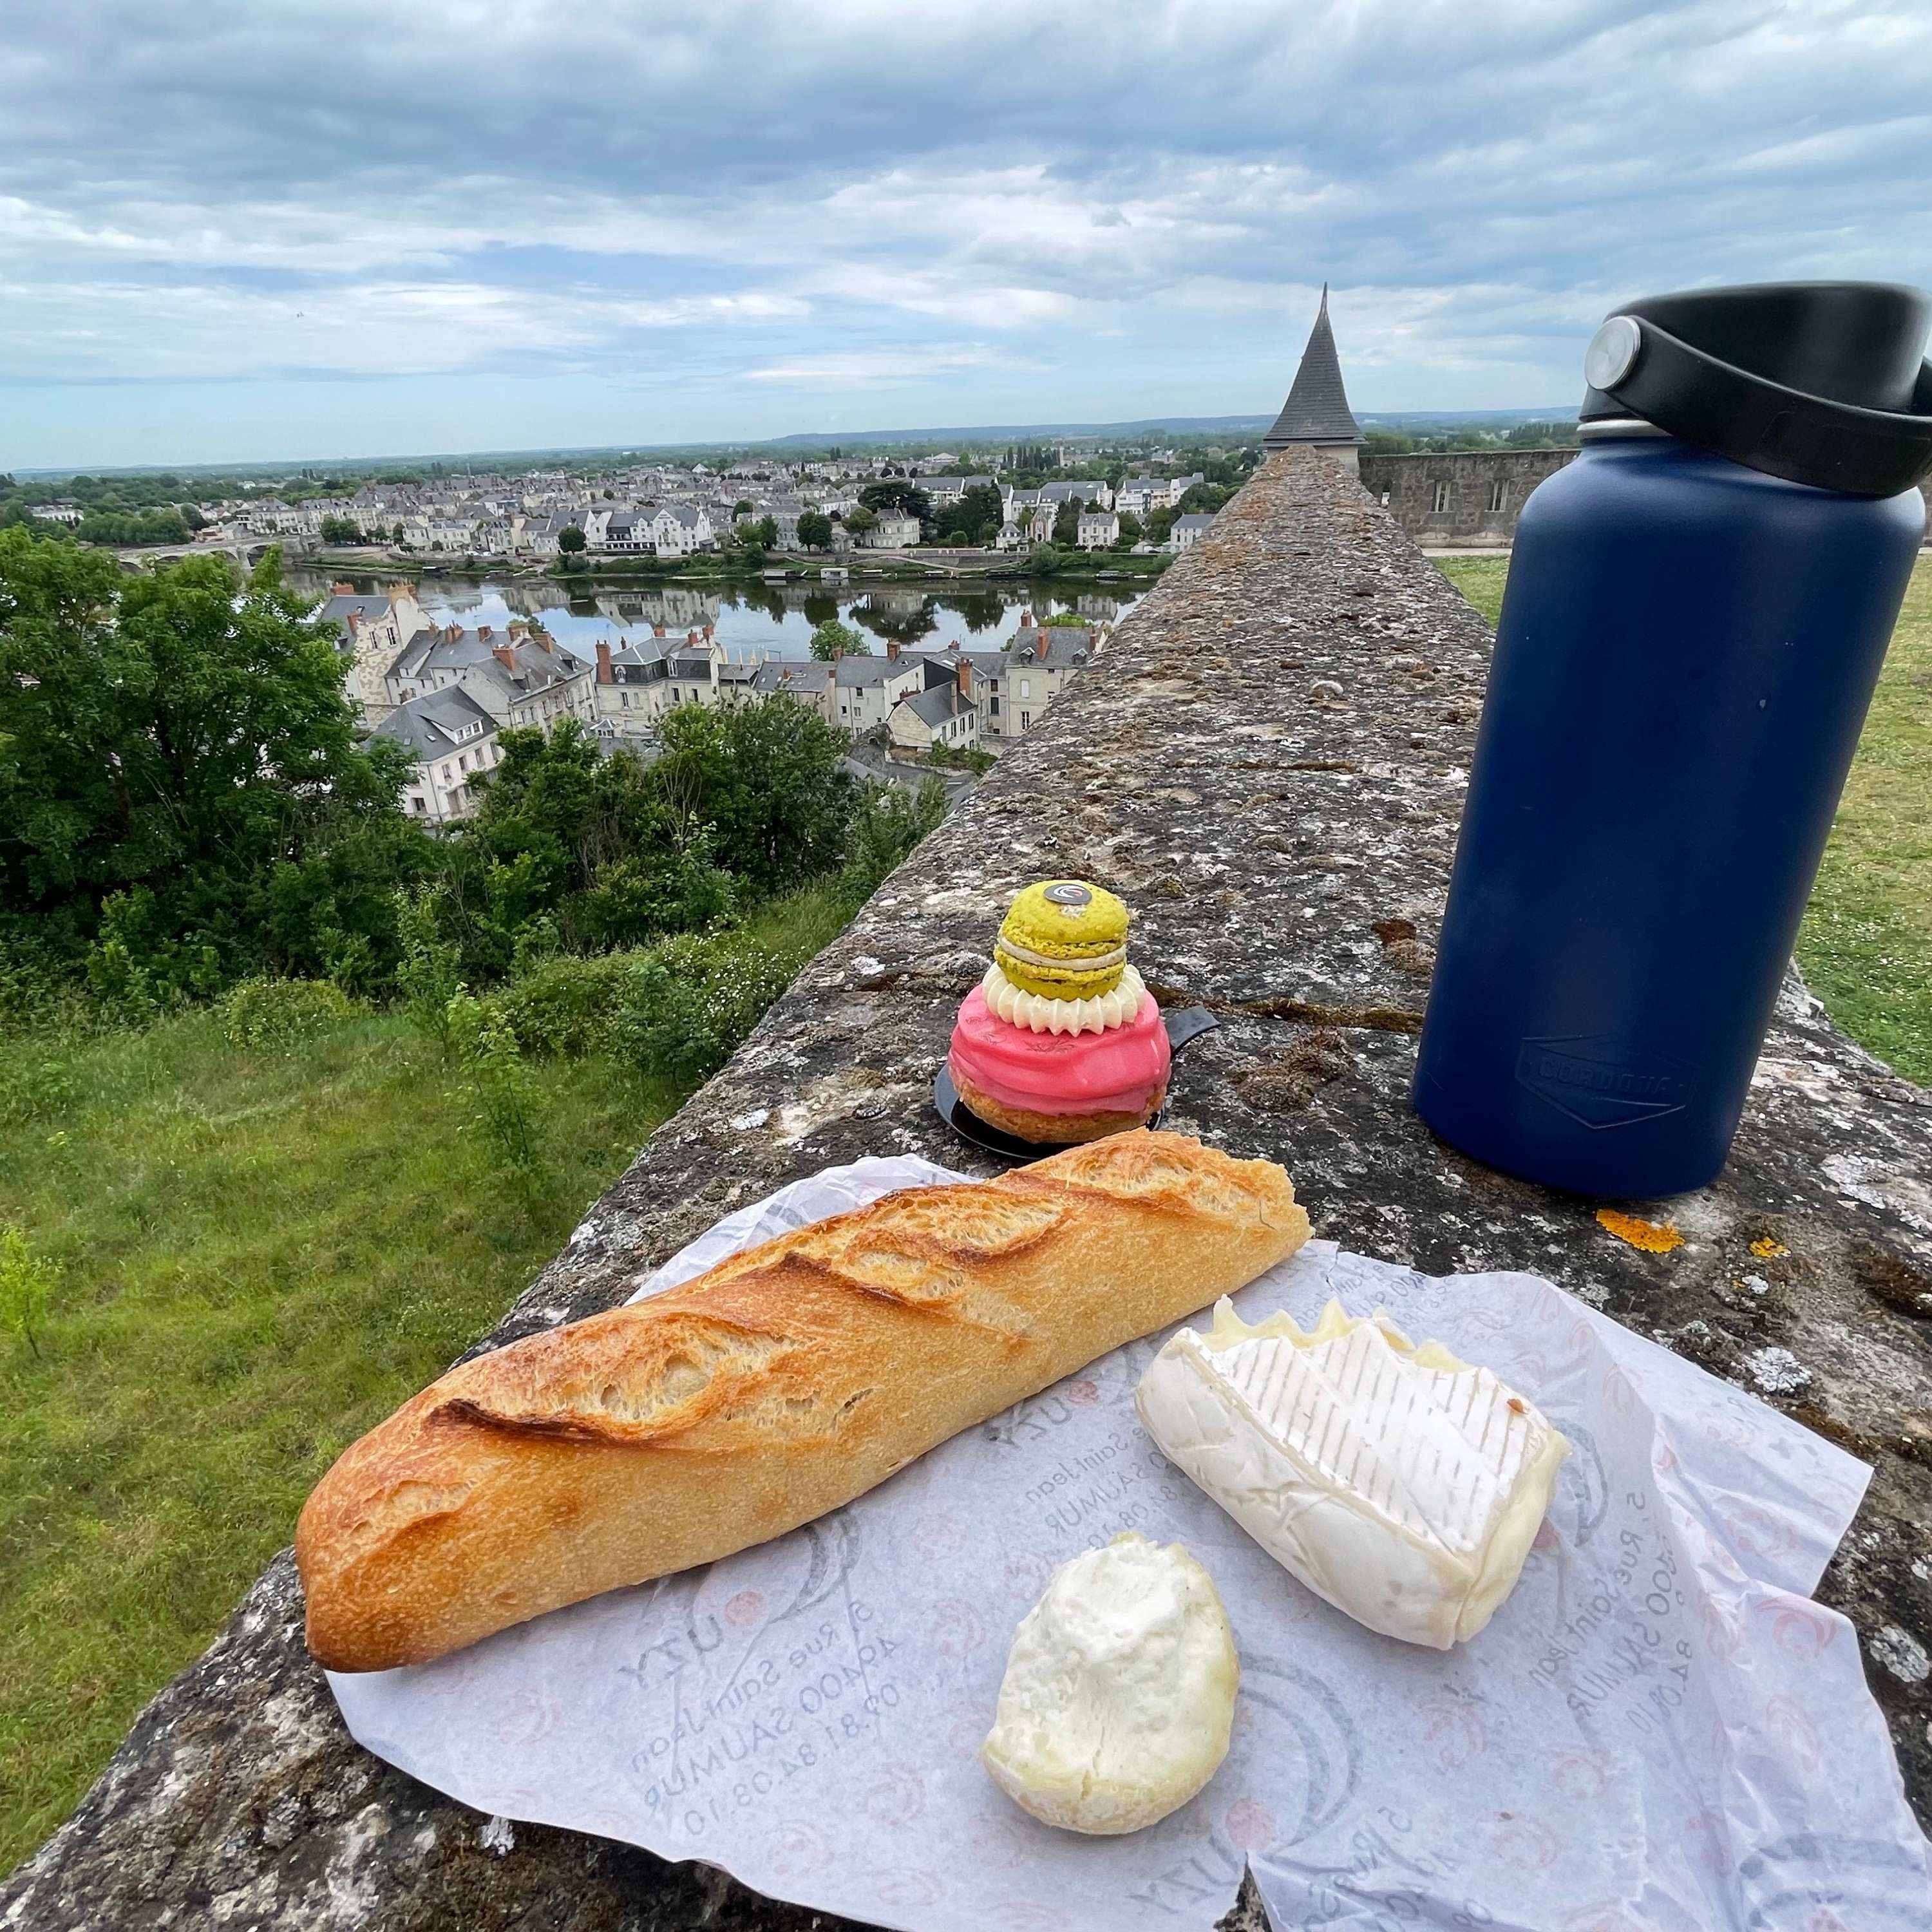 A picnic of cheese, bread, pastry in a historical site in France: France on a student budget episode